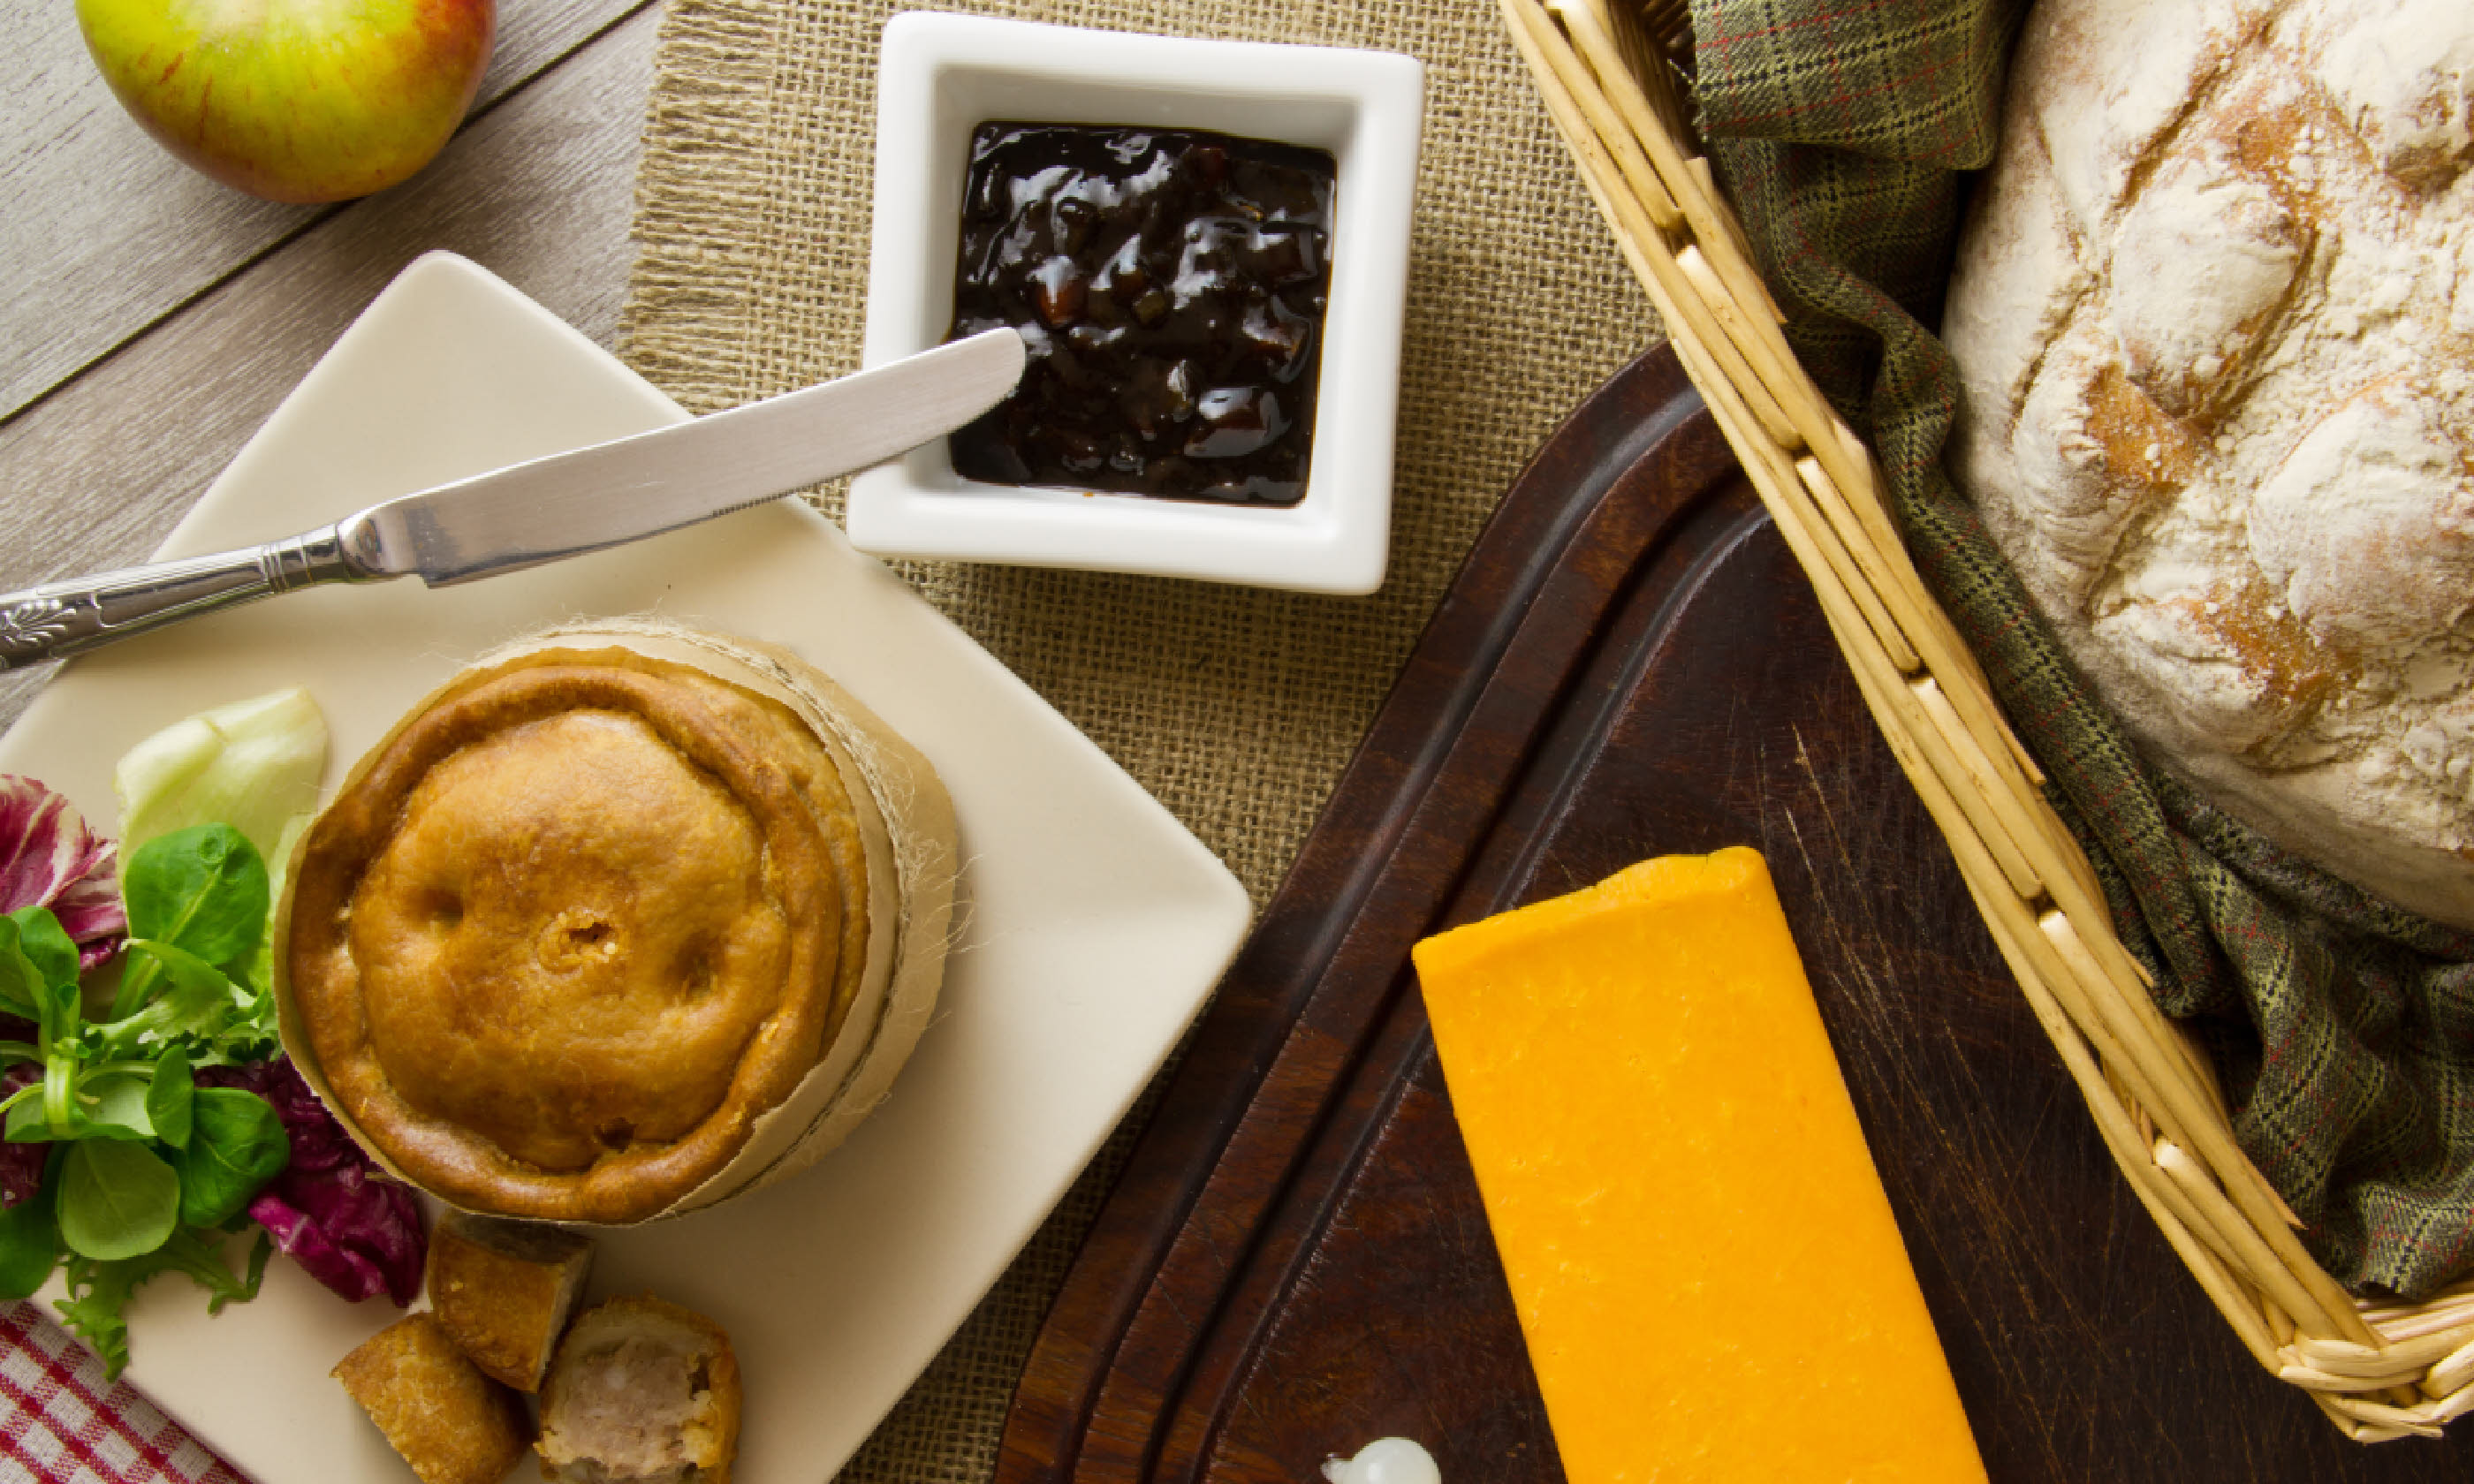 Ploughman's lunch with Melton Mowbray pie (Shutterstock)